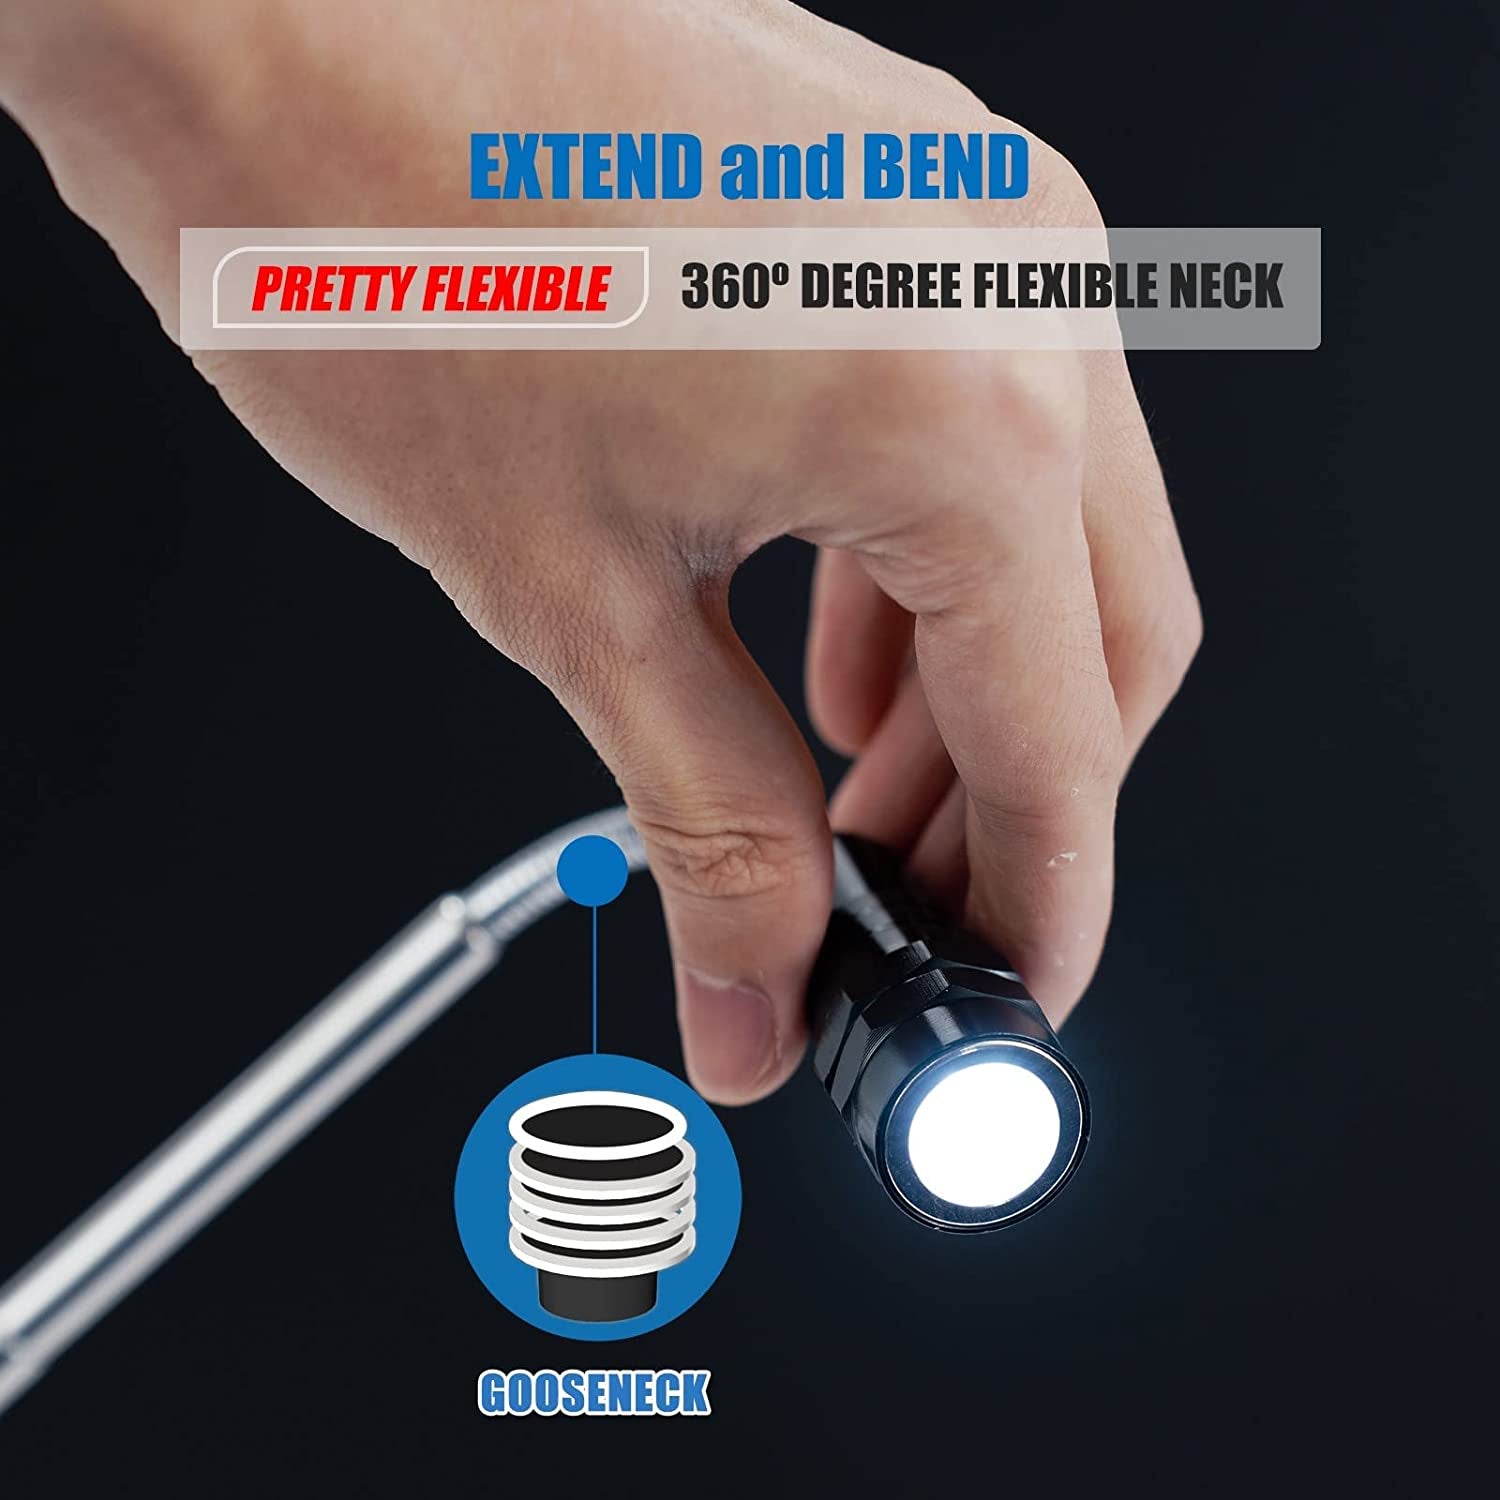 Magnet 3 LED Magnetic Pickup Tool, Telescoping Flexible Extendable Led Flashlights, Perfect Mechanic Pick-Up Tools Christmas Stocking Stuffers Gifts for Men Dad Women, Birthday Gifts for Him